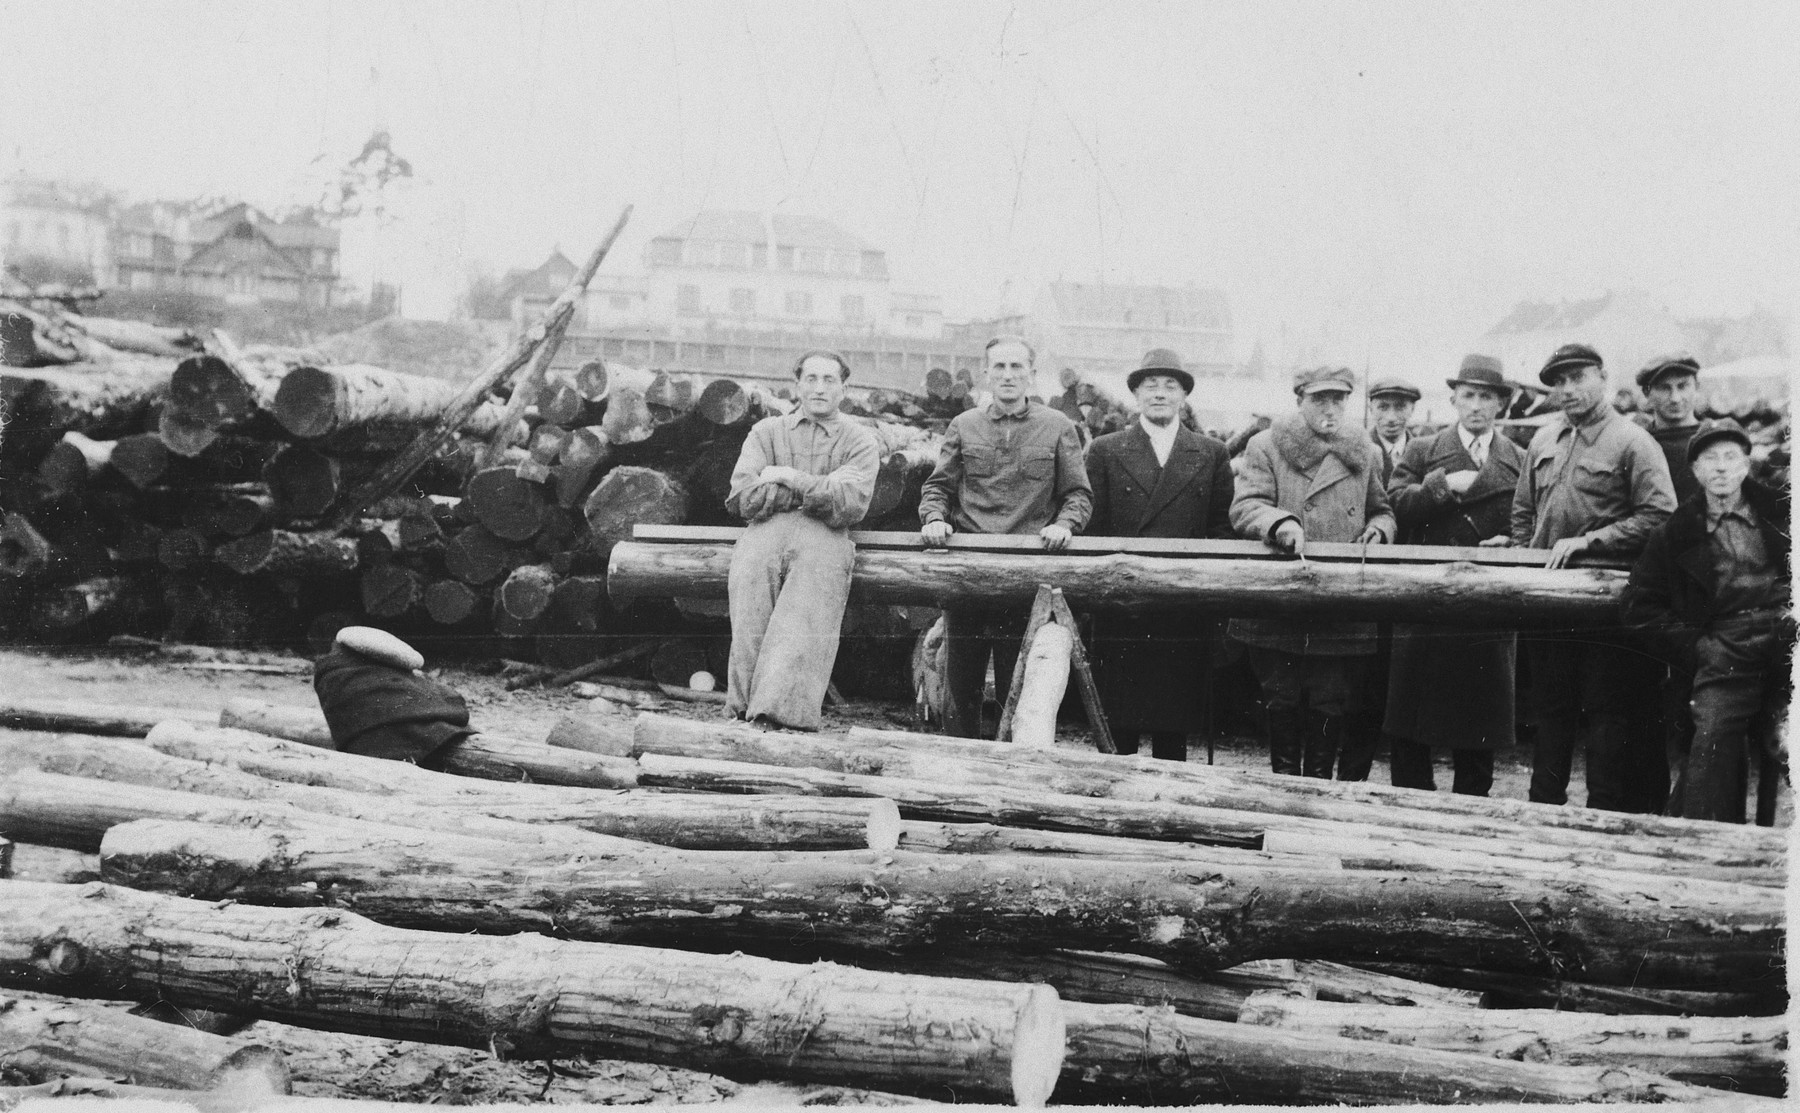 David Shapiro poses in his lumberyard with young Lithuanian Jews who were learning the trade to prepare for their immigration to Palestine.